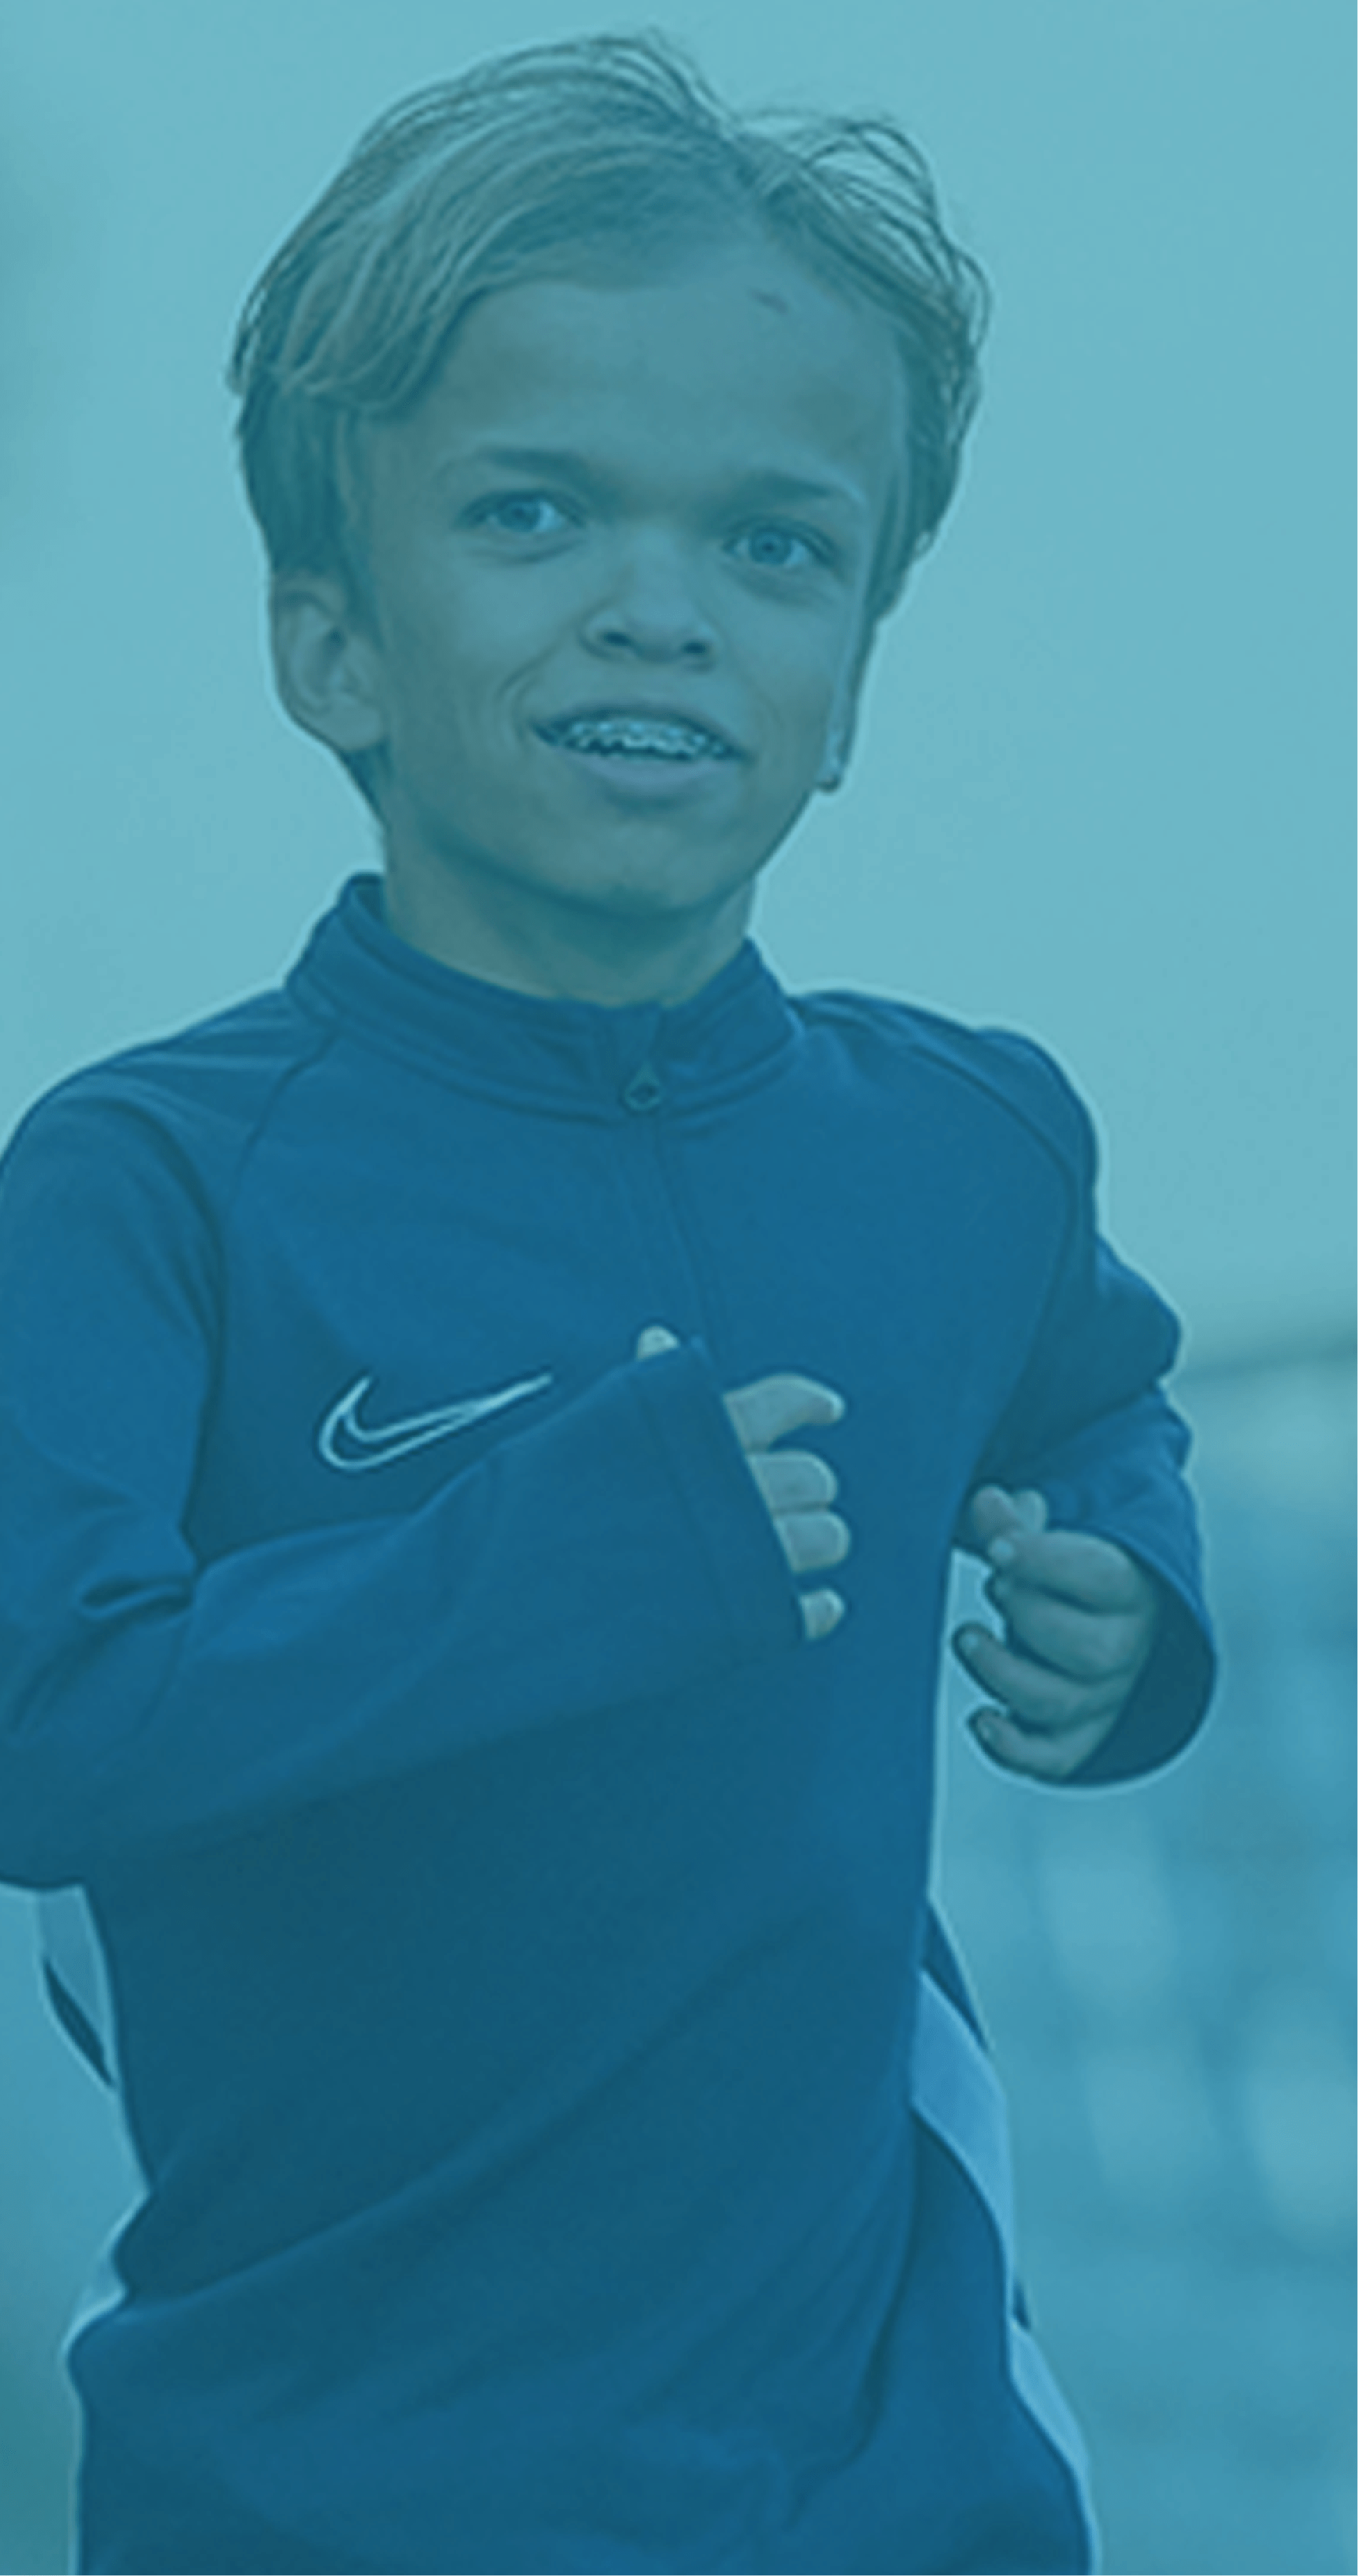 a close up of a young boy with Achondroplasia wearing running clothes